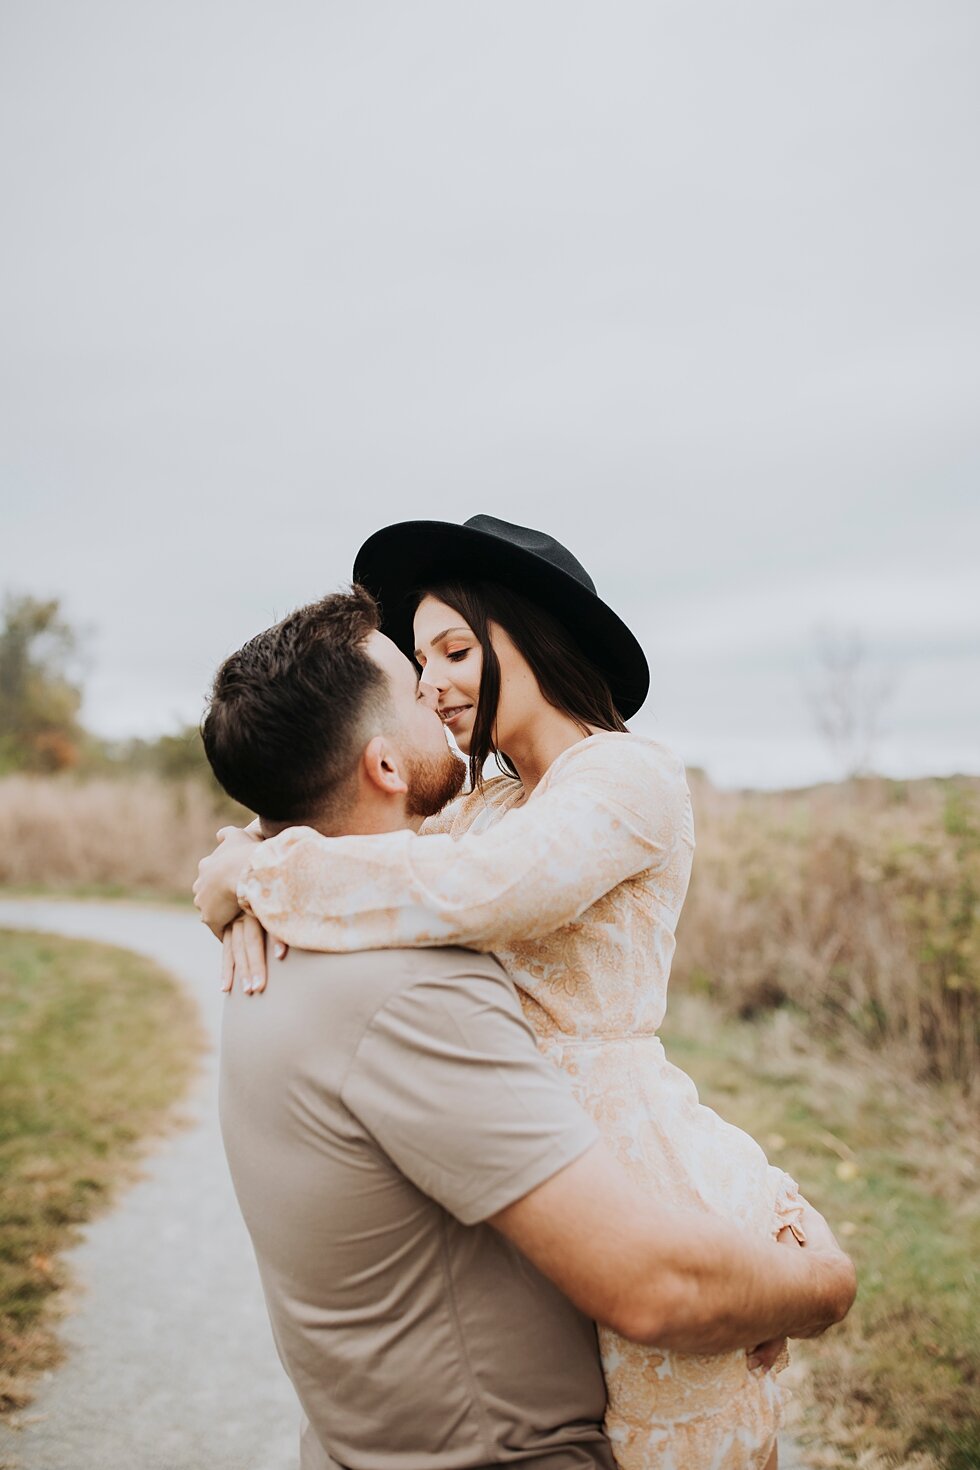  Guy twirls girl around as they kiss for engagement session    #engagementgoals #engagementphotographer #engaged #outdoorengagement #kentuckyphotographer #indianaphotographer #louisvillephotographer #engagementphotos #savethedatephotos #savethedates 